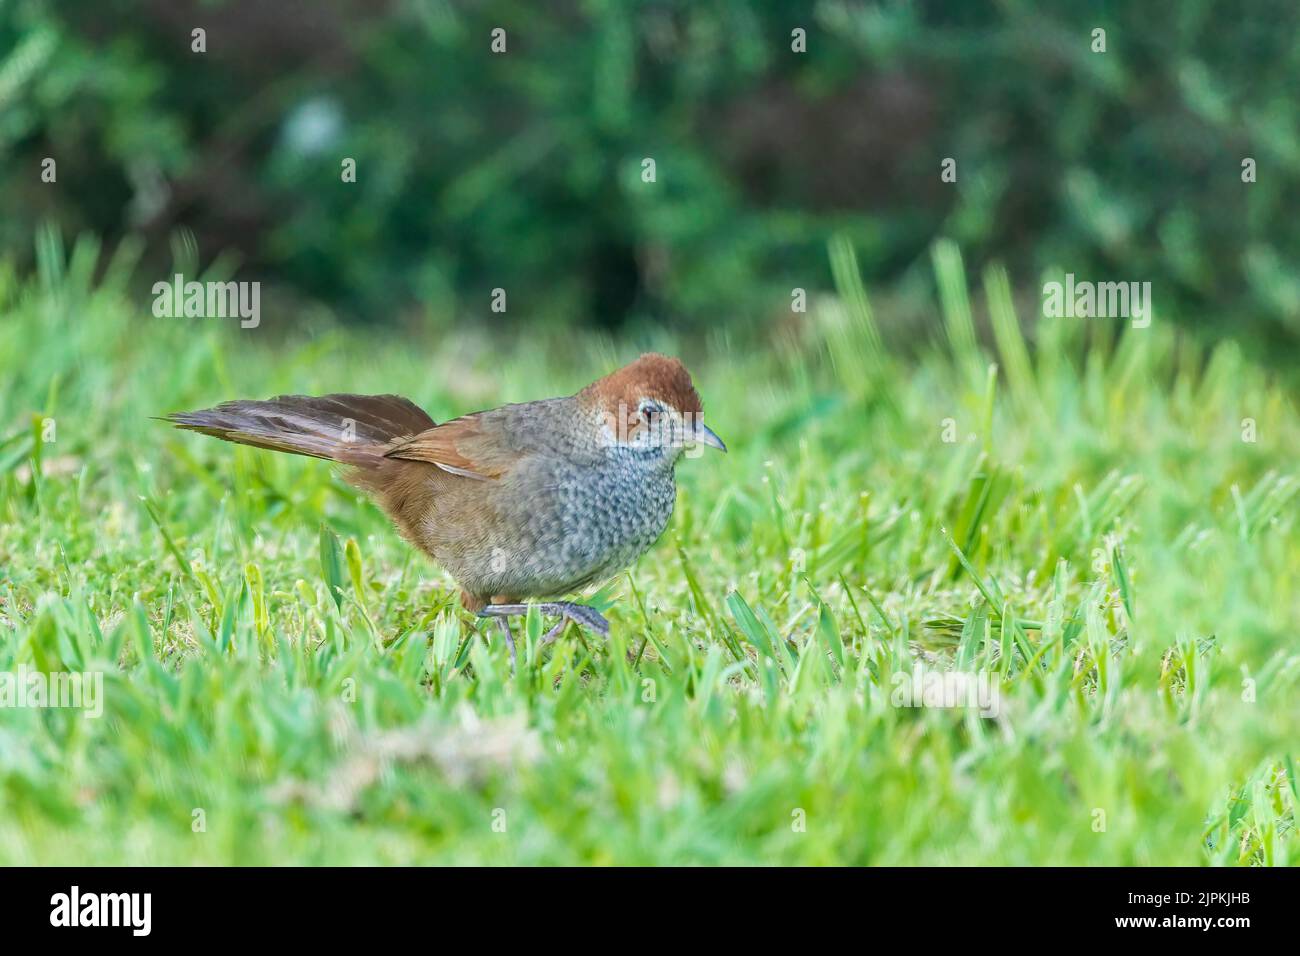 A medium-sized, ground-dwelling thrushlike Australian bird with short rounded wings and a long tail known as the Rufous Bristlebird Stock Photo